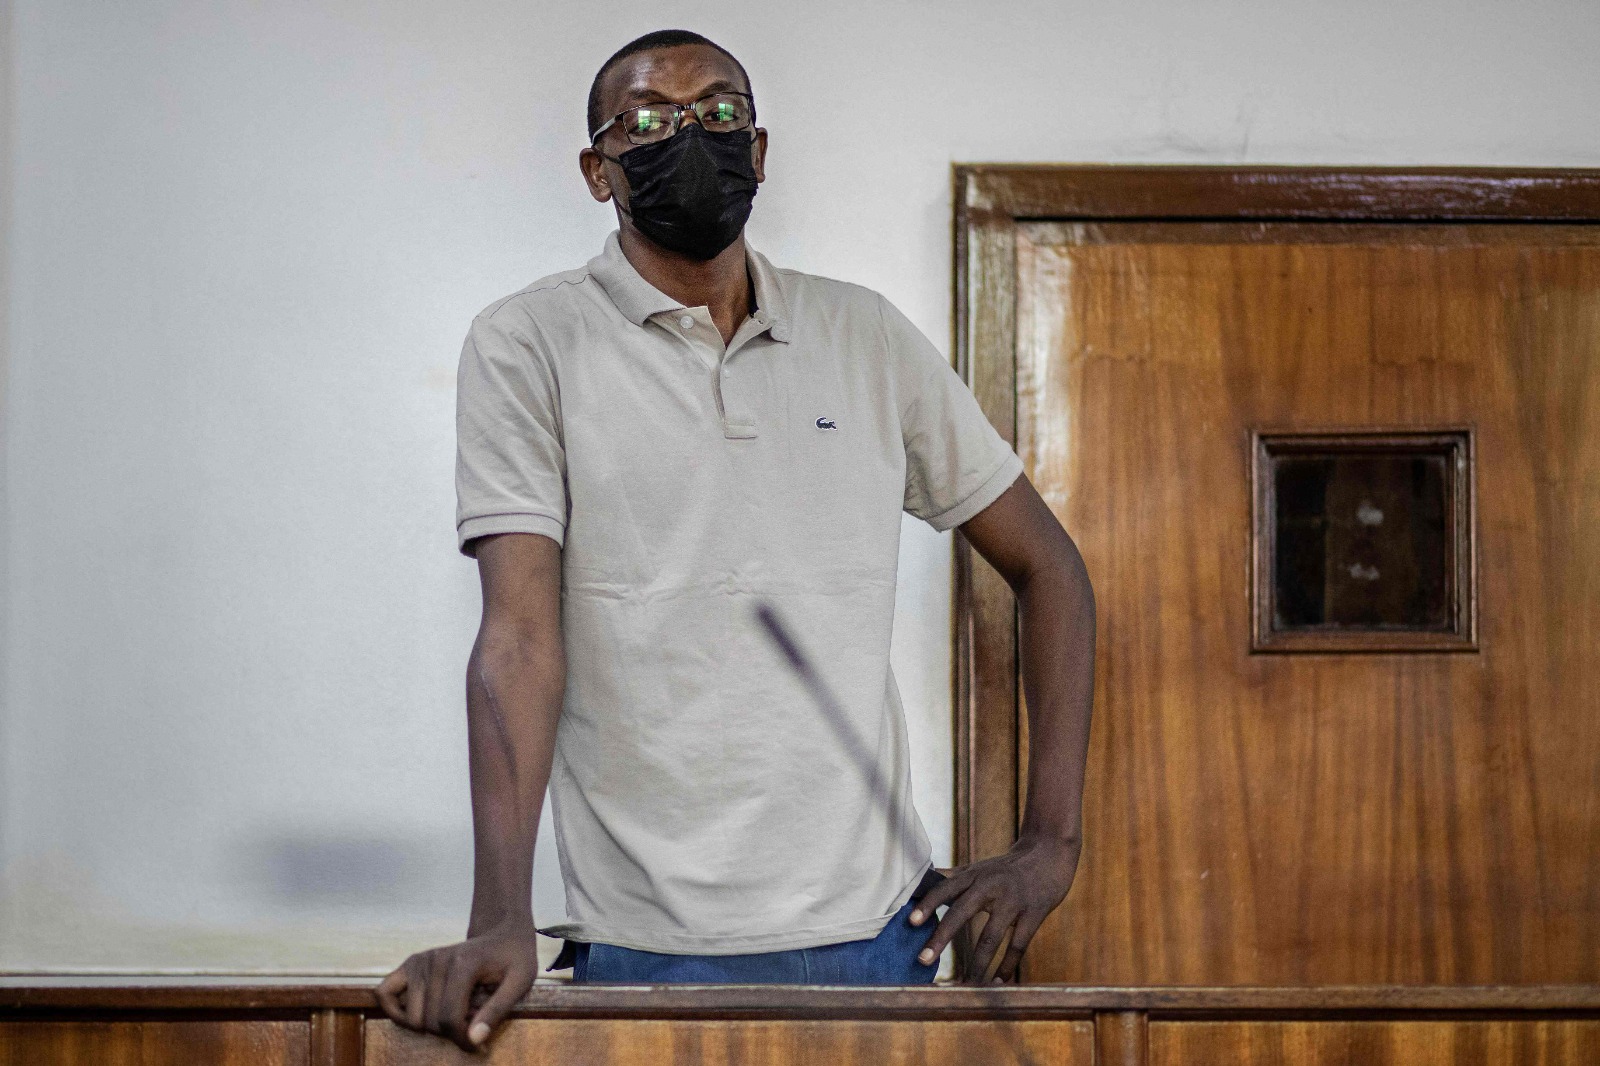 In this file photograph taken, Kakwenza Rukirabashaija, a prominent Ugandan satirical writer and an outspoken government critic appears in court on charges of offensive communication involving insulting the country’s ruling family, in Kampala. - AFP